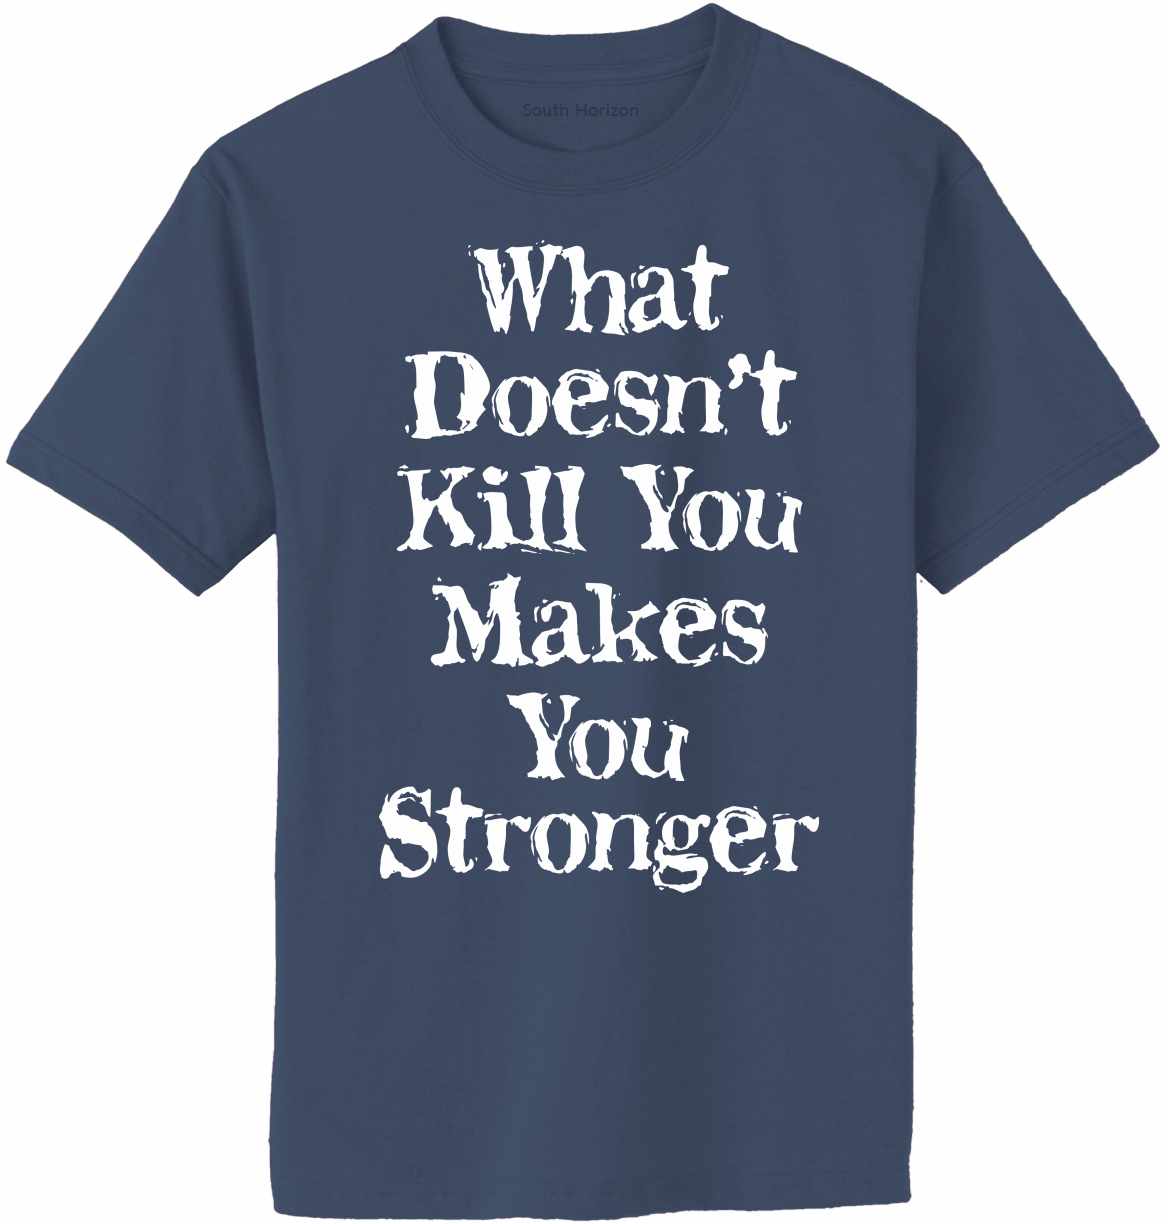 What Doesn't Kill You Makes You Stronger on Adult T-Shirt (#1248-1)